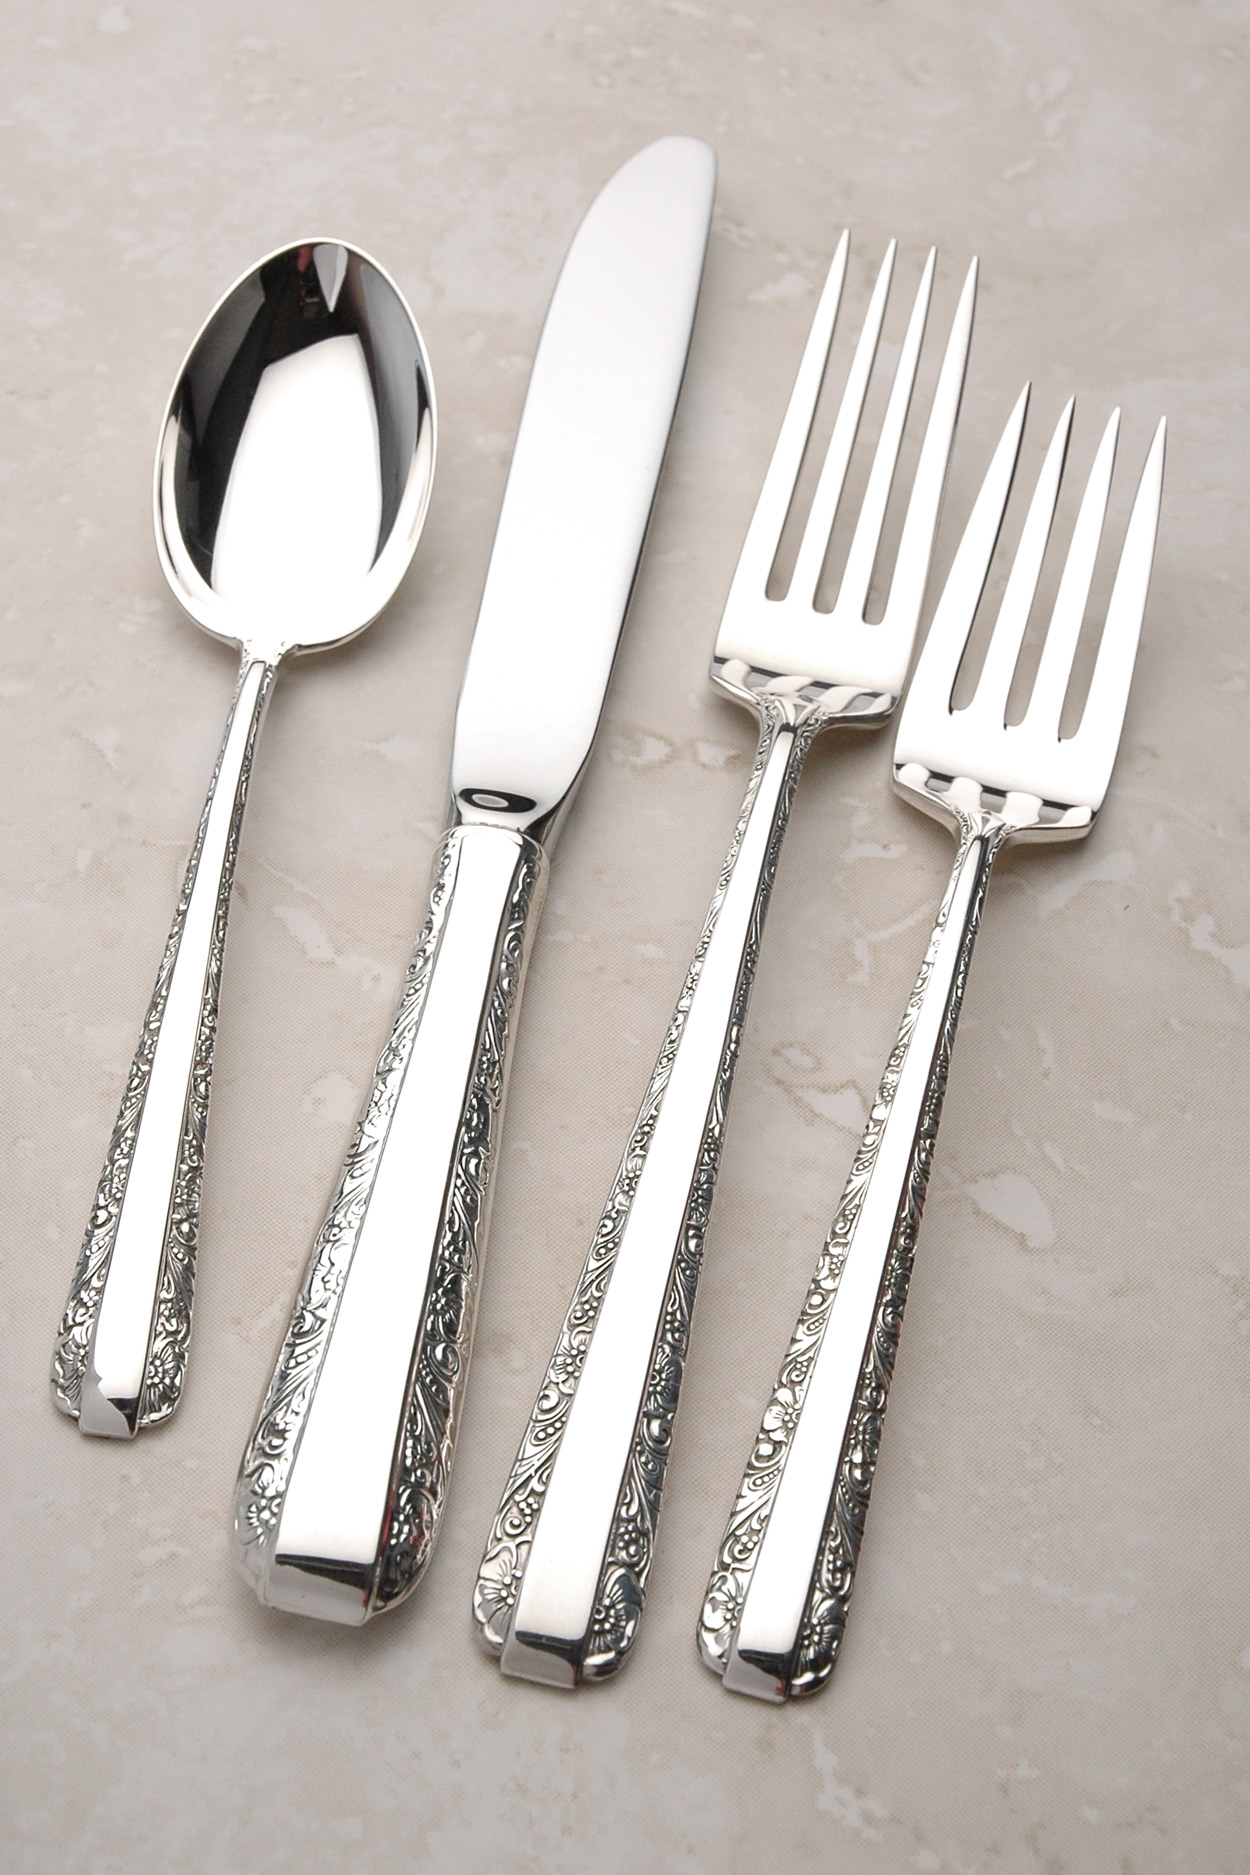 FOUR Towle Sterling Silver Candlelight Dinner Knives 